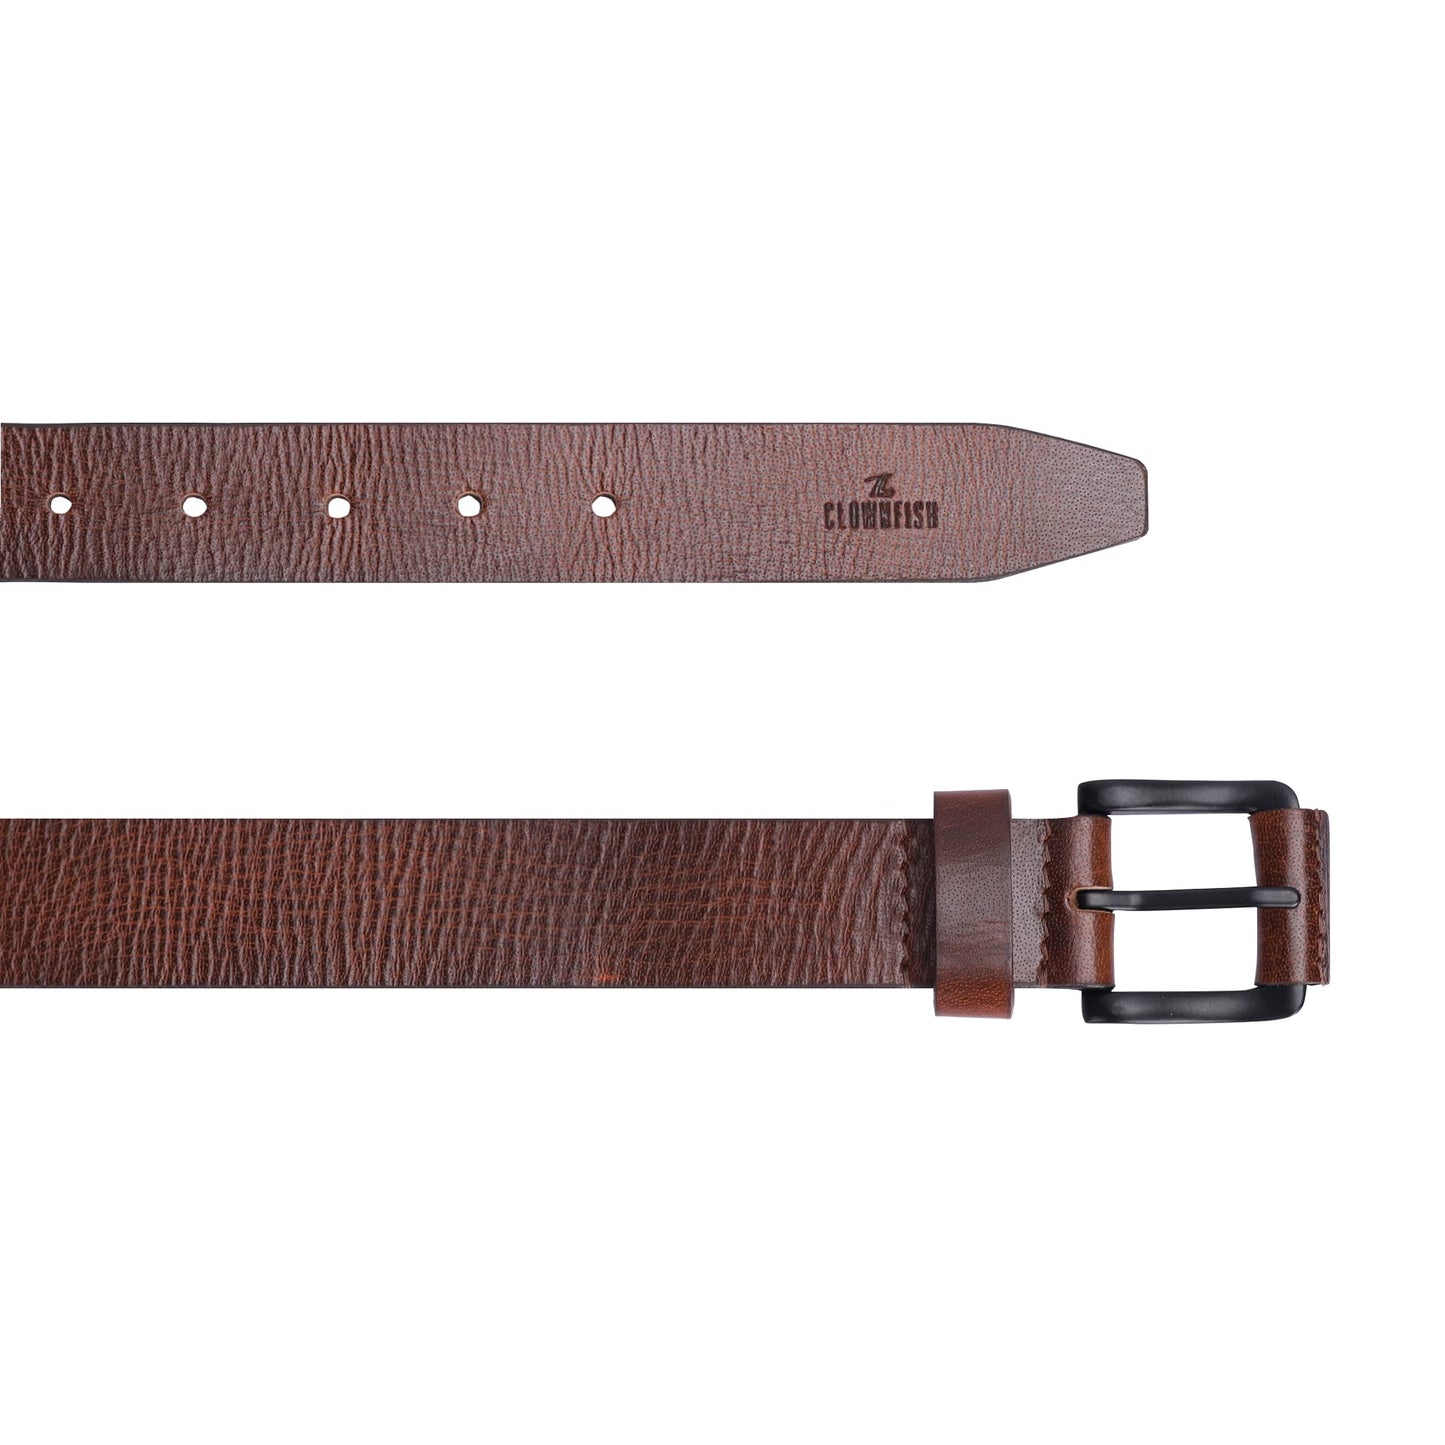 THE CLOWNFISH Men's Genuine Leather Belt - Tan (Size-36 inches)